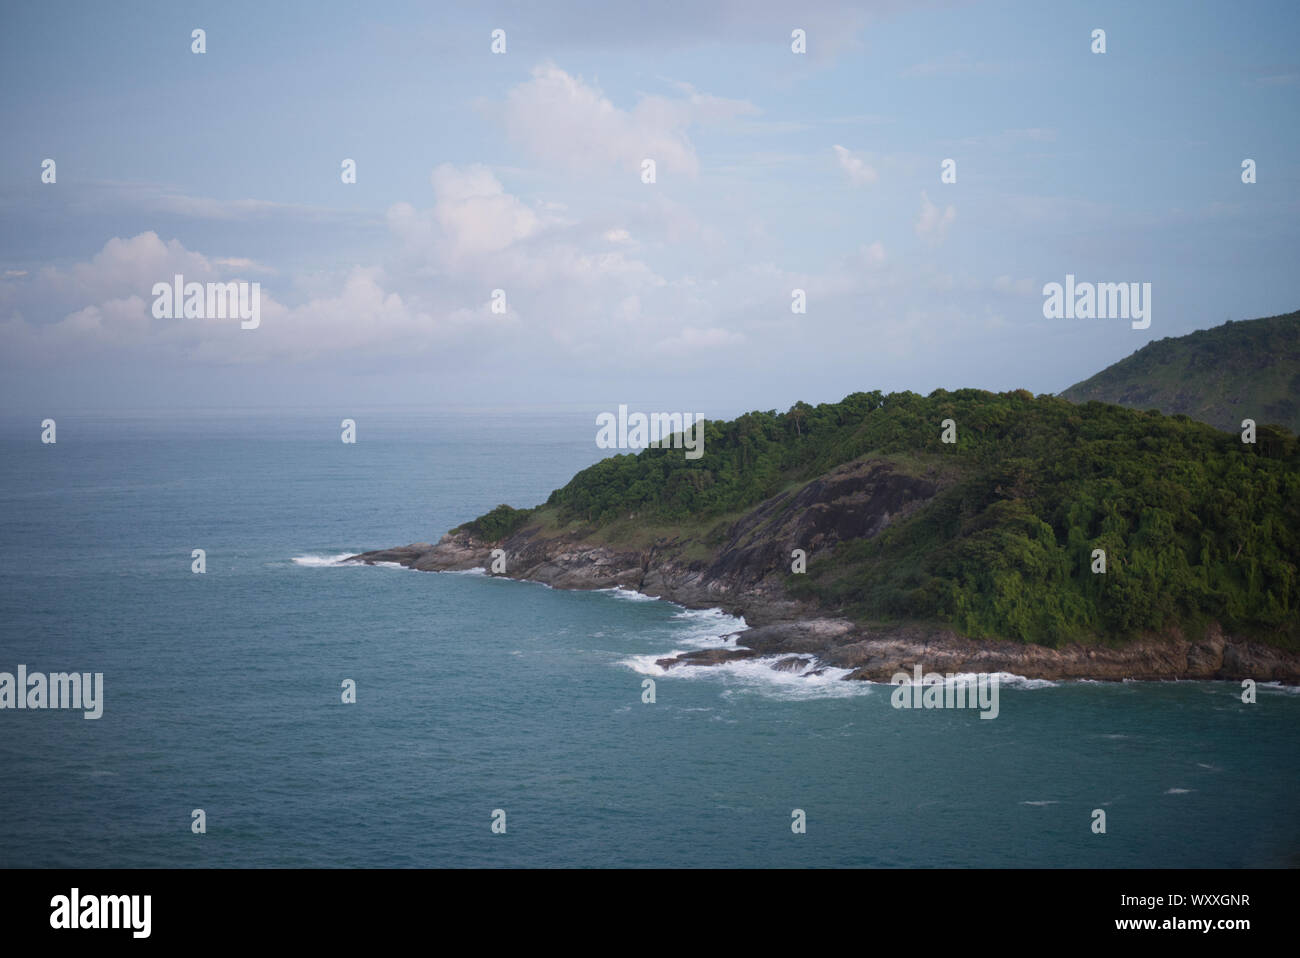 Cloudy day at Promthep Cape in Phuket Thailand Stock Photo